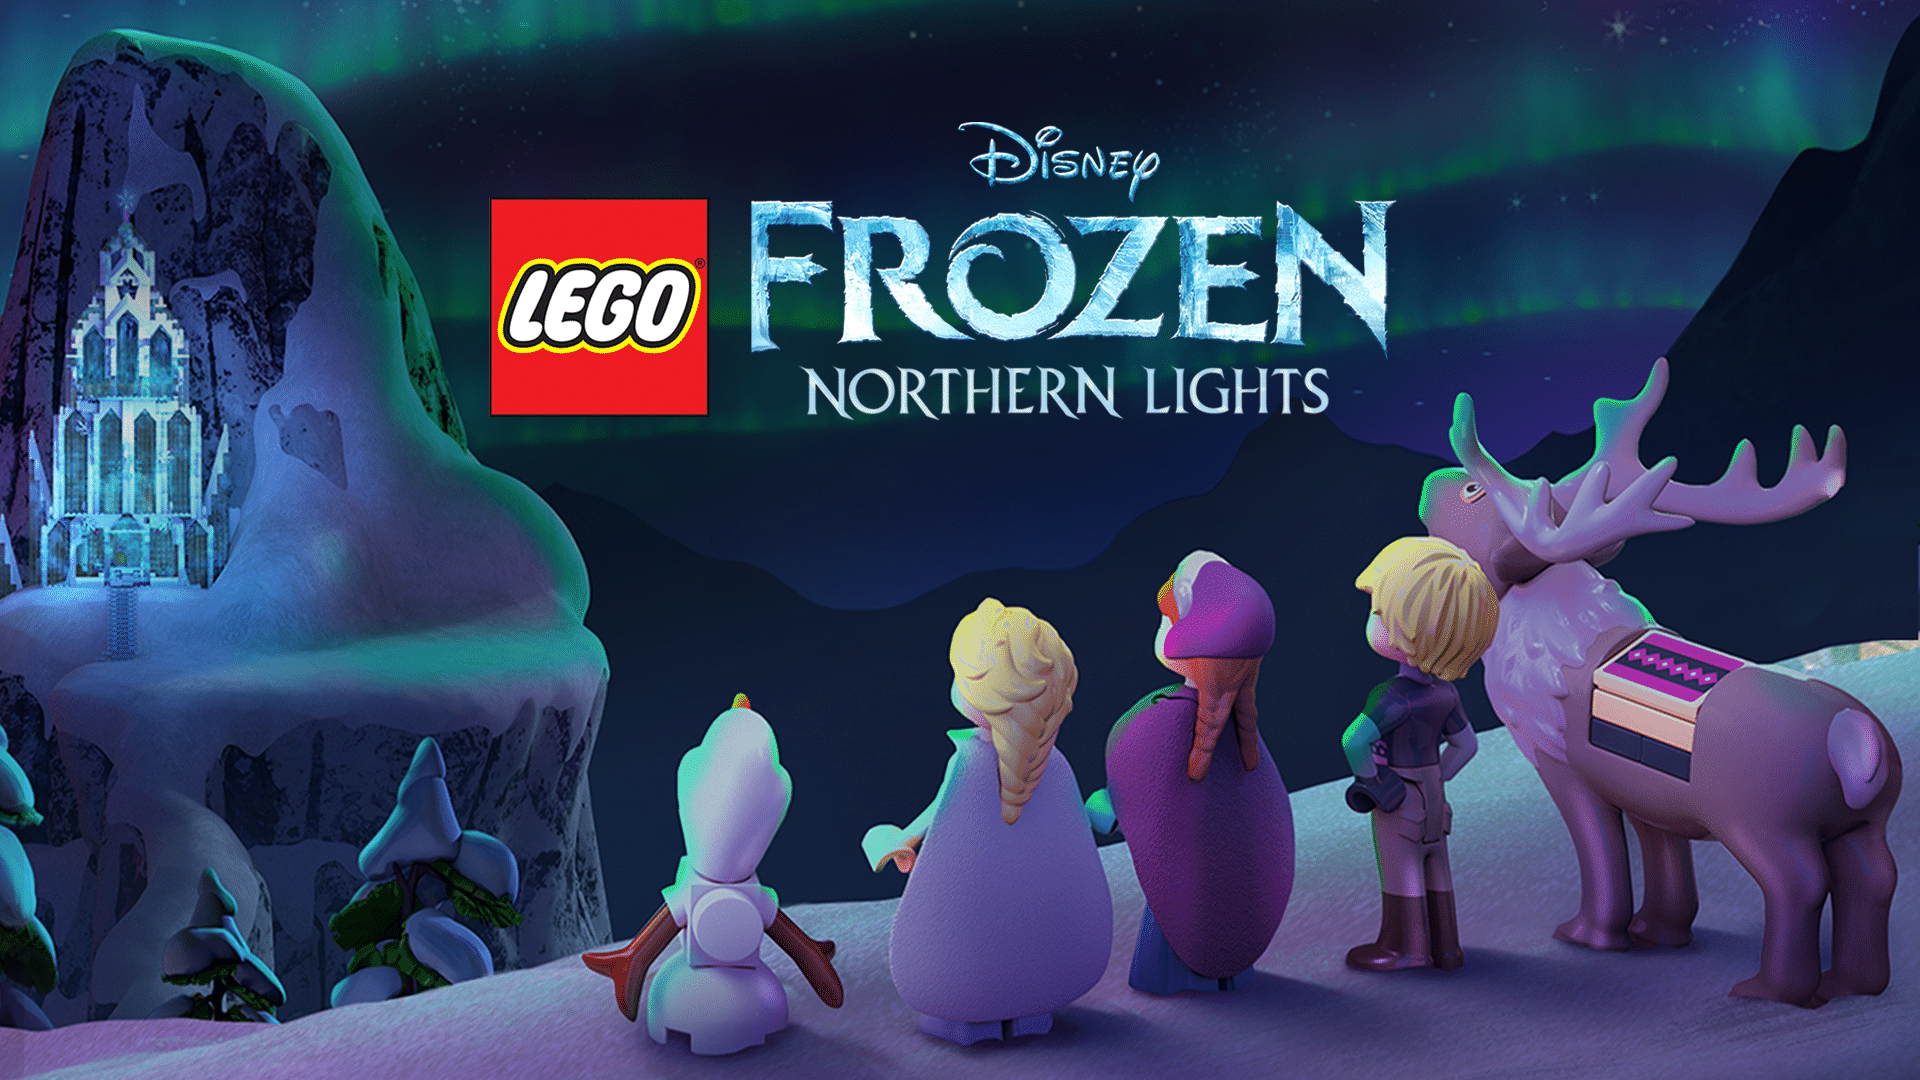 LEGO Frozen Northern Lights” Removed From Disney+ – What's On